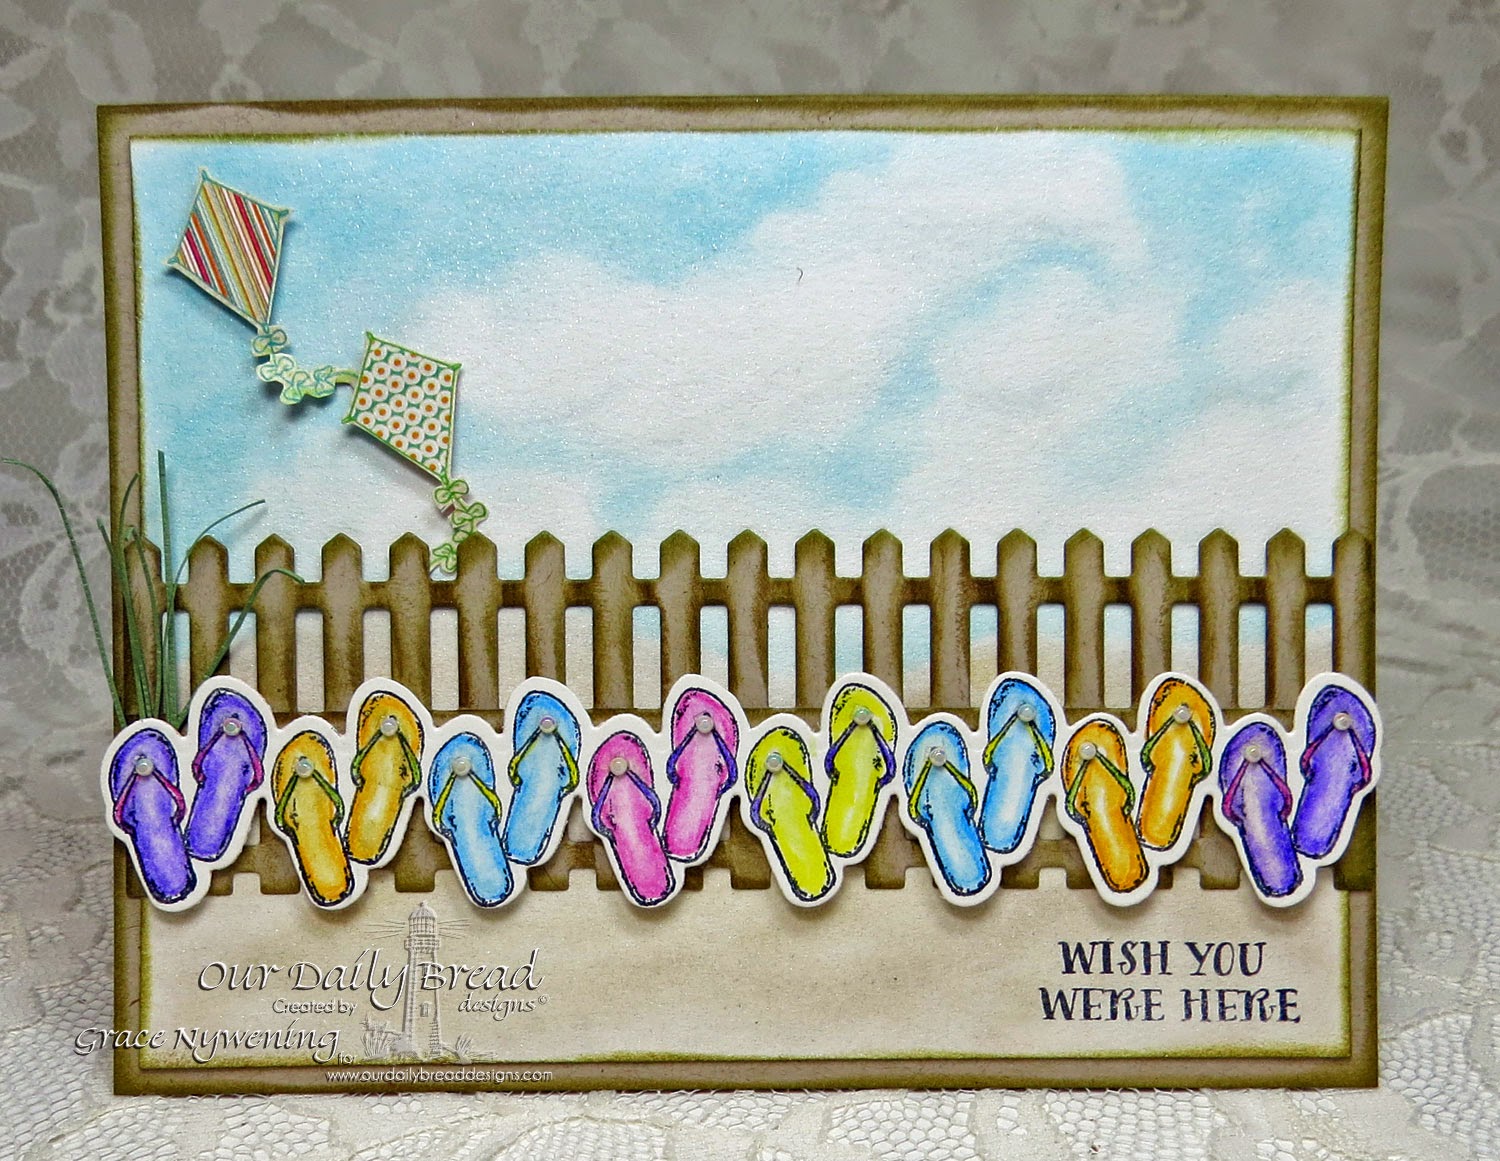 ODBD stamps: Flip Flop Border, Life is Better, designed by Grace Nywening